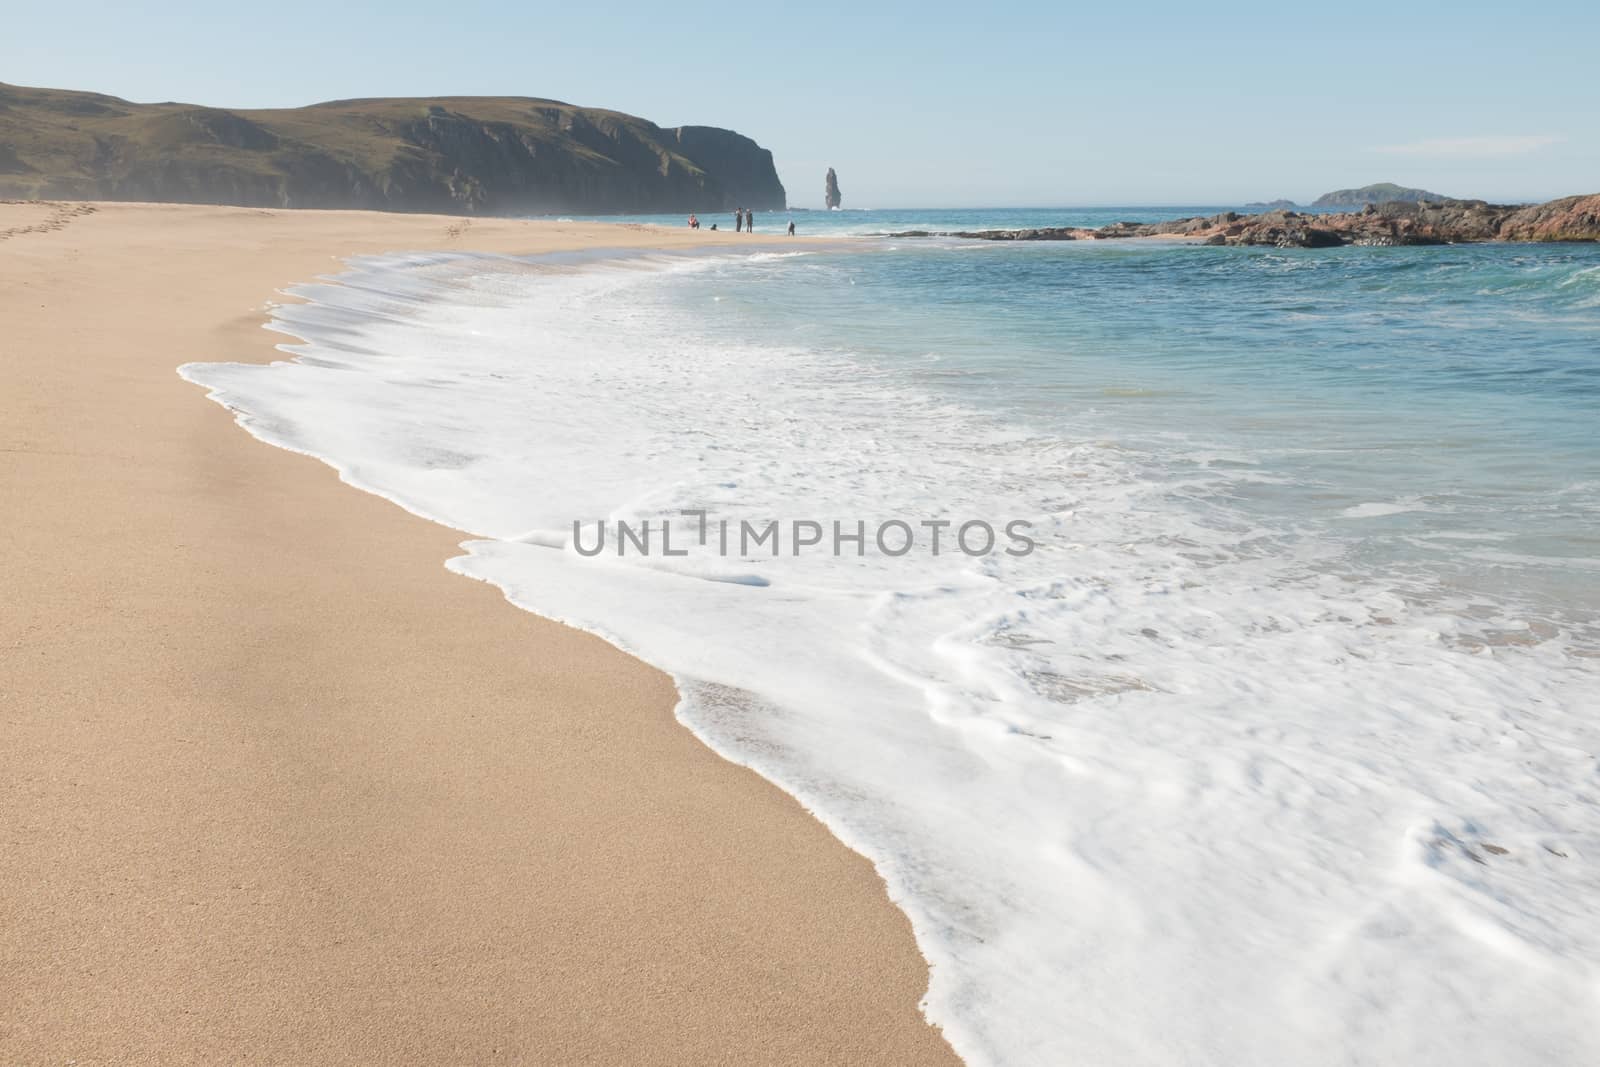 Waves break up the steep white sandy beach with people looking out to the sea-stack off the headland at Sandwood Bay, Sutherland, Scotland, UK.